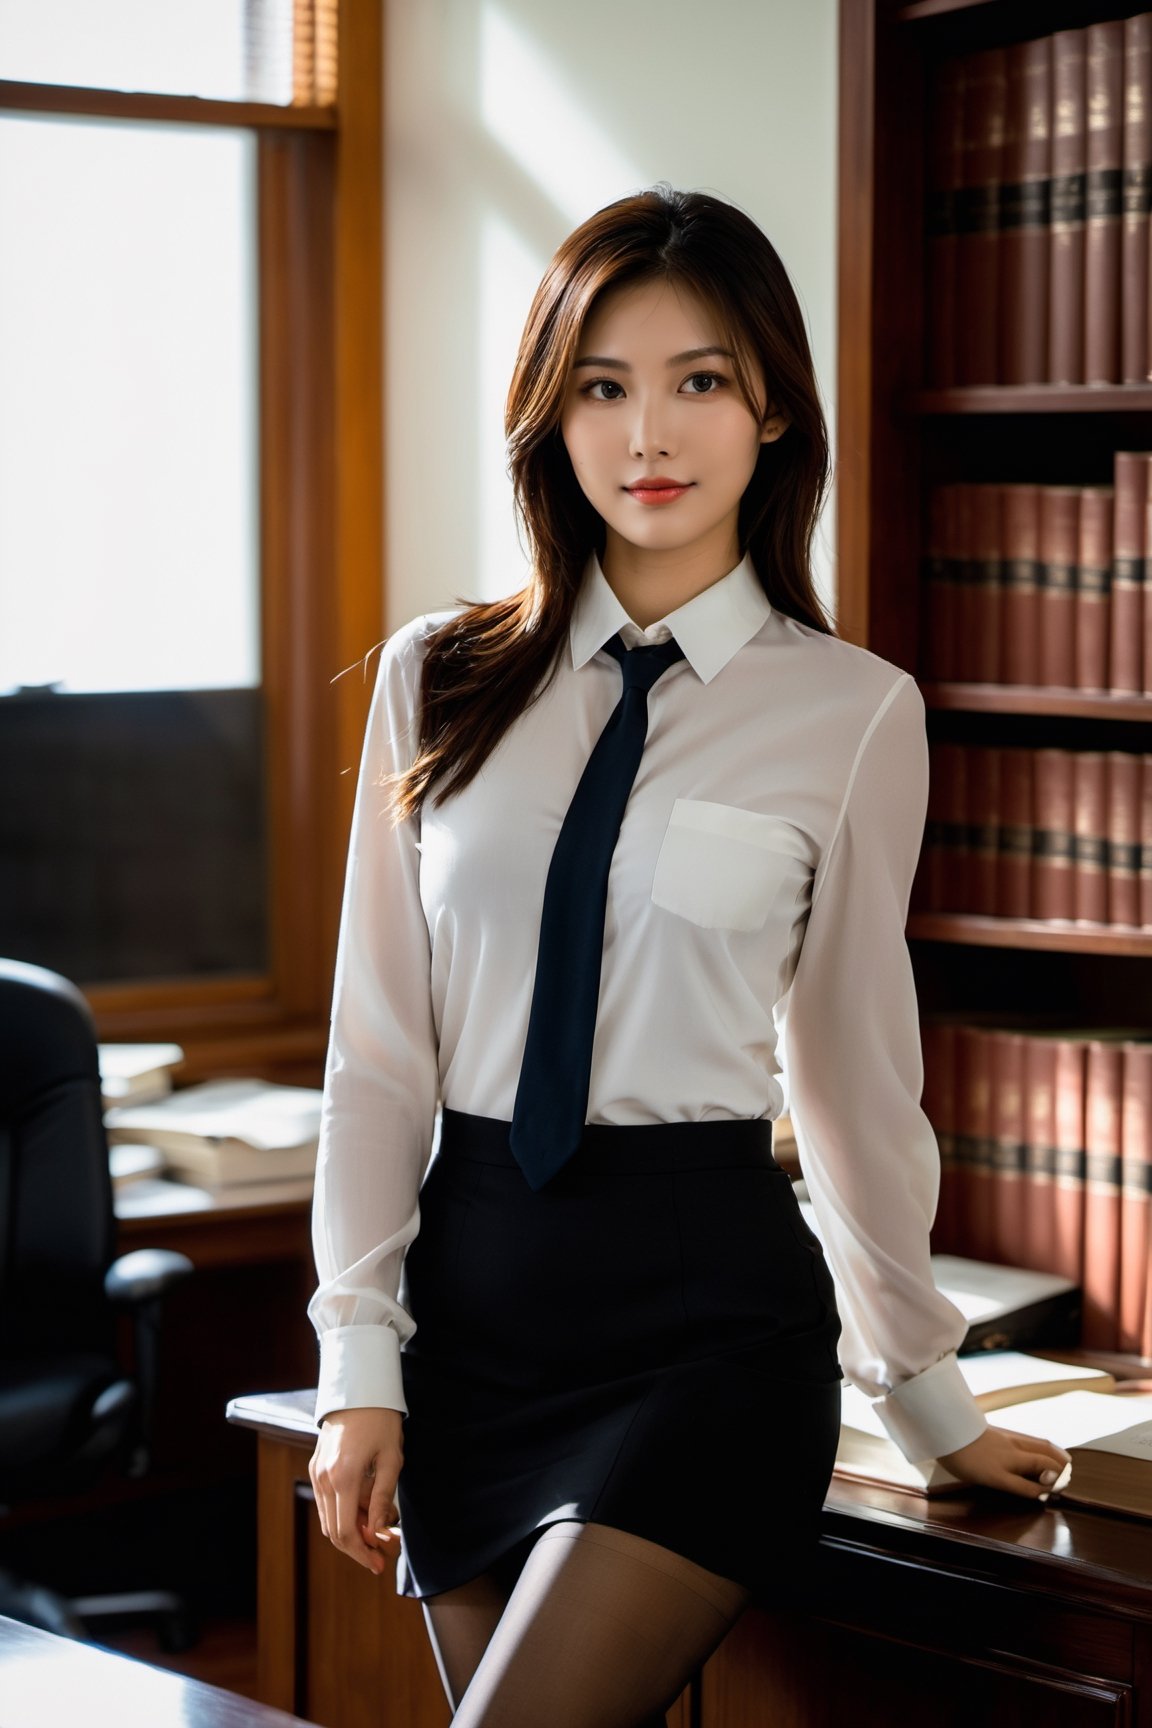 xxmix_girl, 1girl, Realistic, (full body:1.3), Candid Photo of an Asian female lawyer, scene set in a well-furnished office, books lining the shelves behind her, warm color temperature, calm demeanor emphasized, soft smile, (black pantyhose:1.4), hint of contentment evident, captured using a 50mm lens, balance between subject and surroundings, natural lighting from a nearby window, gentle shadows cast, serene atmosphere